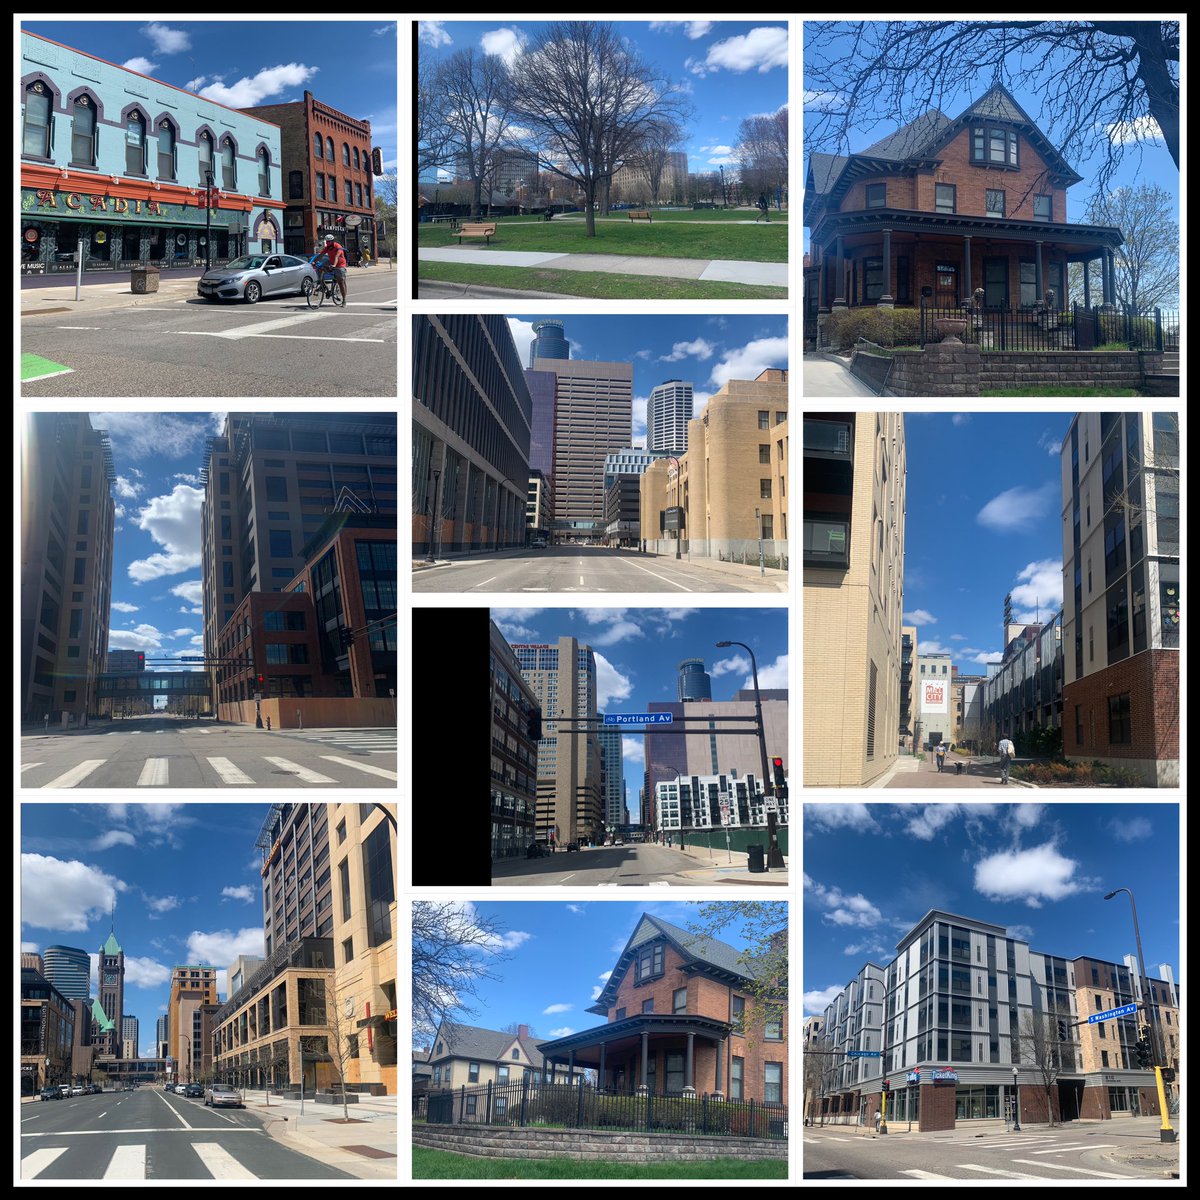 #minneapolis #minnesota 
Took advantage of being downtown Minneapolis today. Captured some photos before going to vaccine app. Beautiful day, good weather. Weird to see some of the streets so empty. https://t.co/H9PctXoXn0